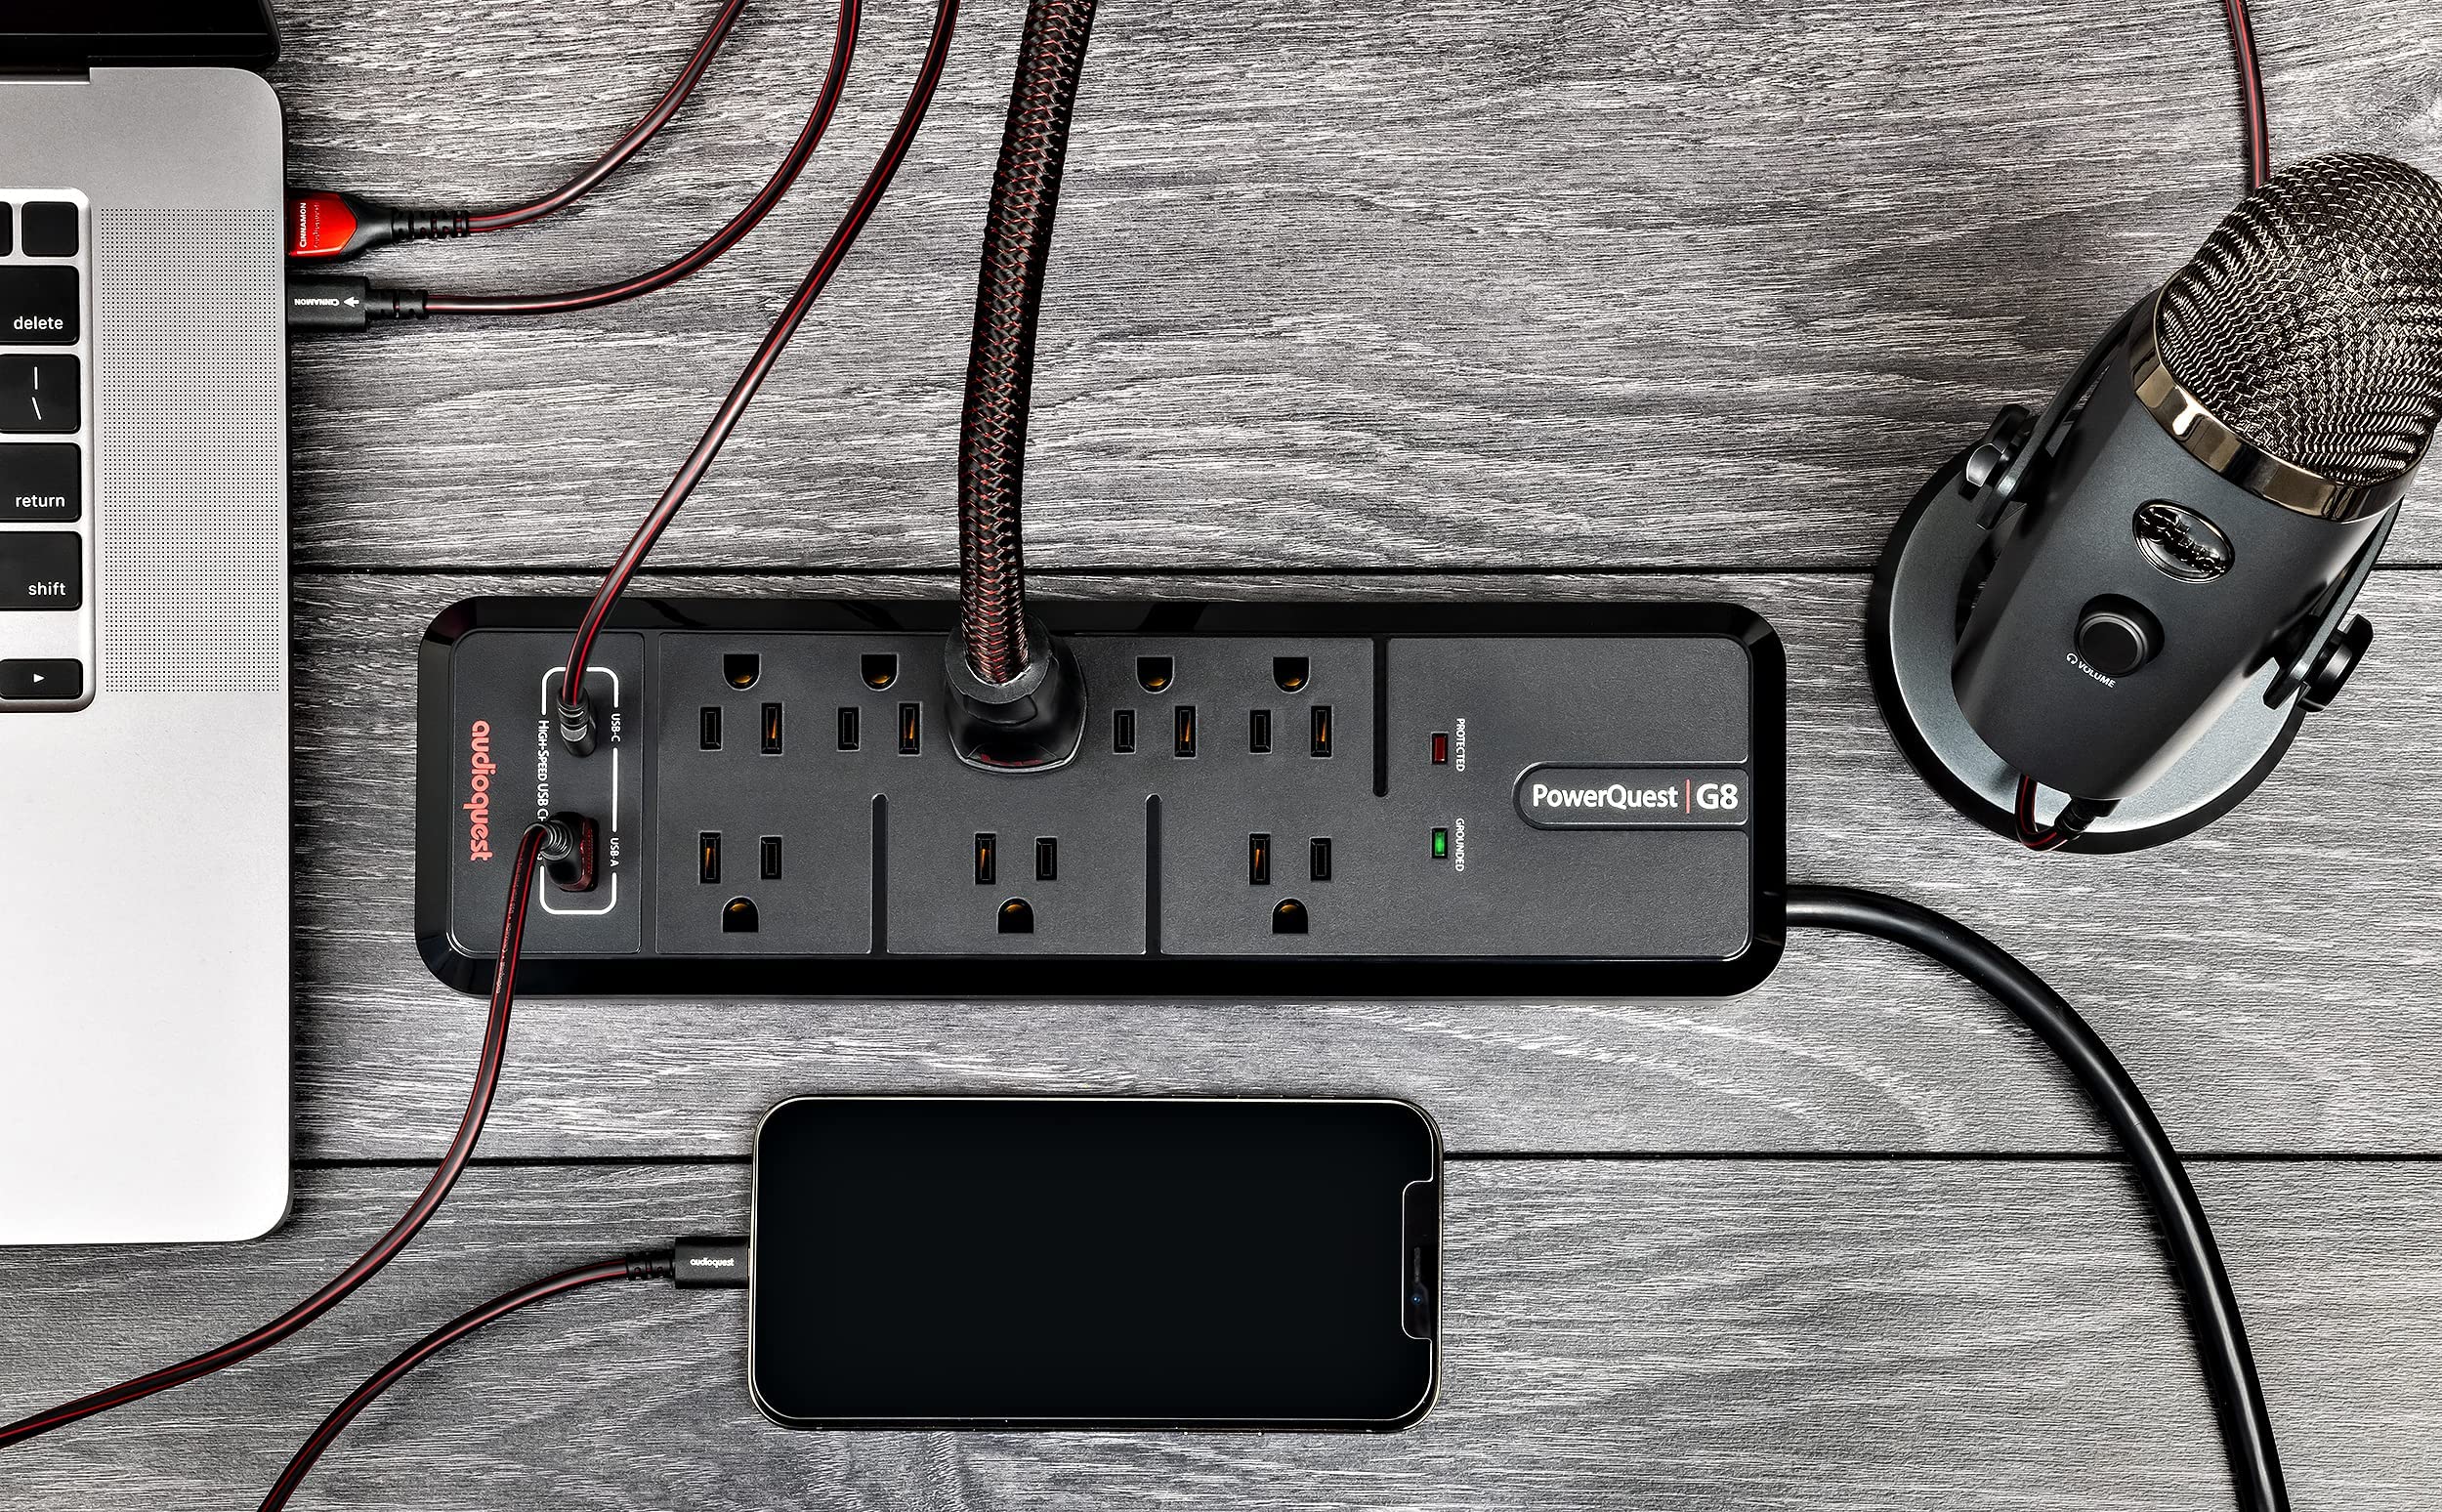 AudioQuest PowerQuest G8 – 8-Outlet Surge Protector with USB-A and USB-C Charging Ports - Perfect for TV, AV Receiver, Xbox, Playstation, Soundbar, Computer, and Home Office